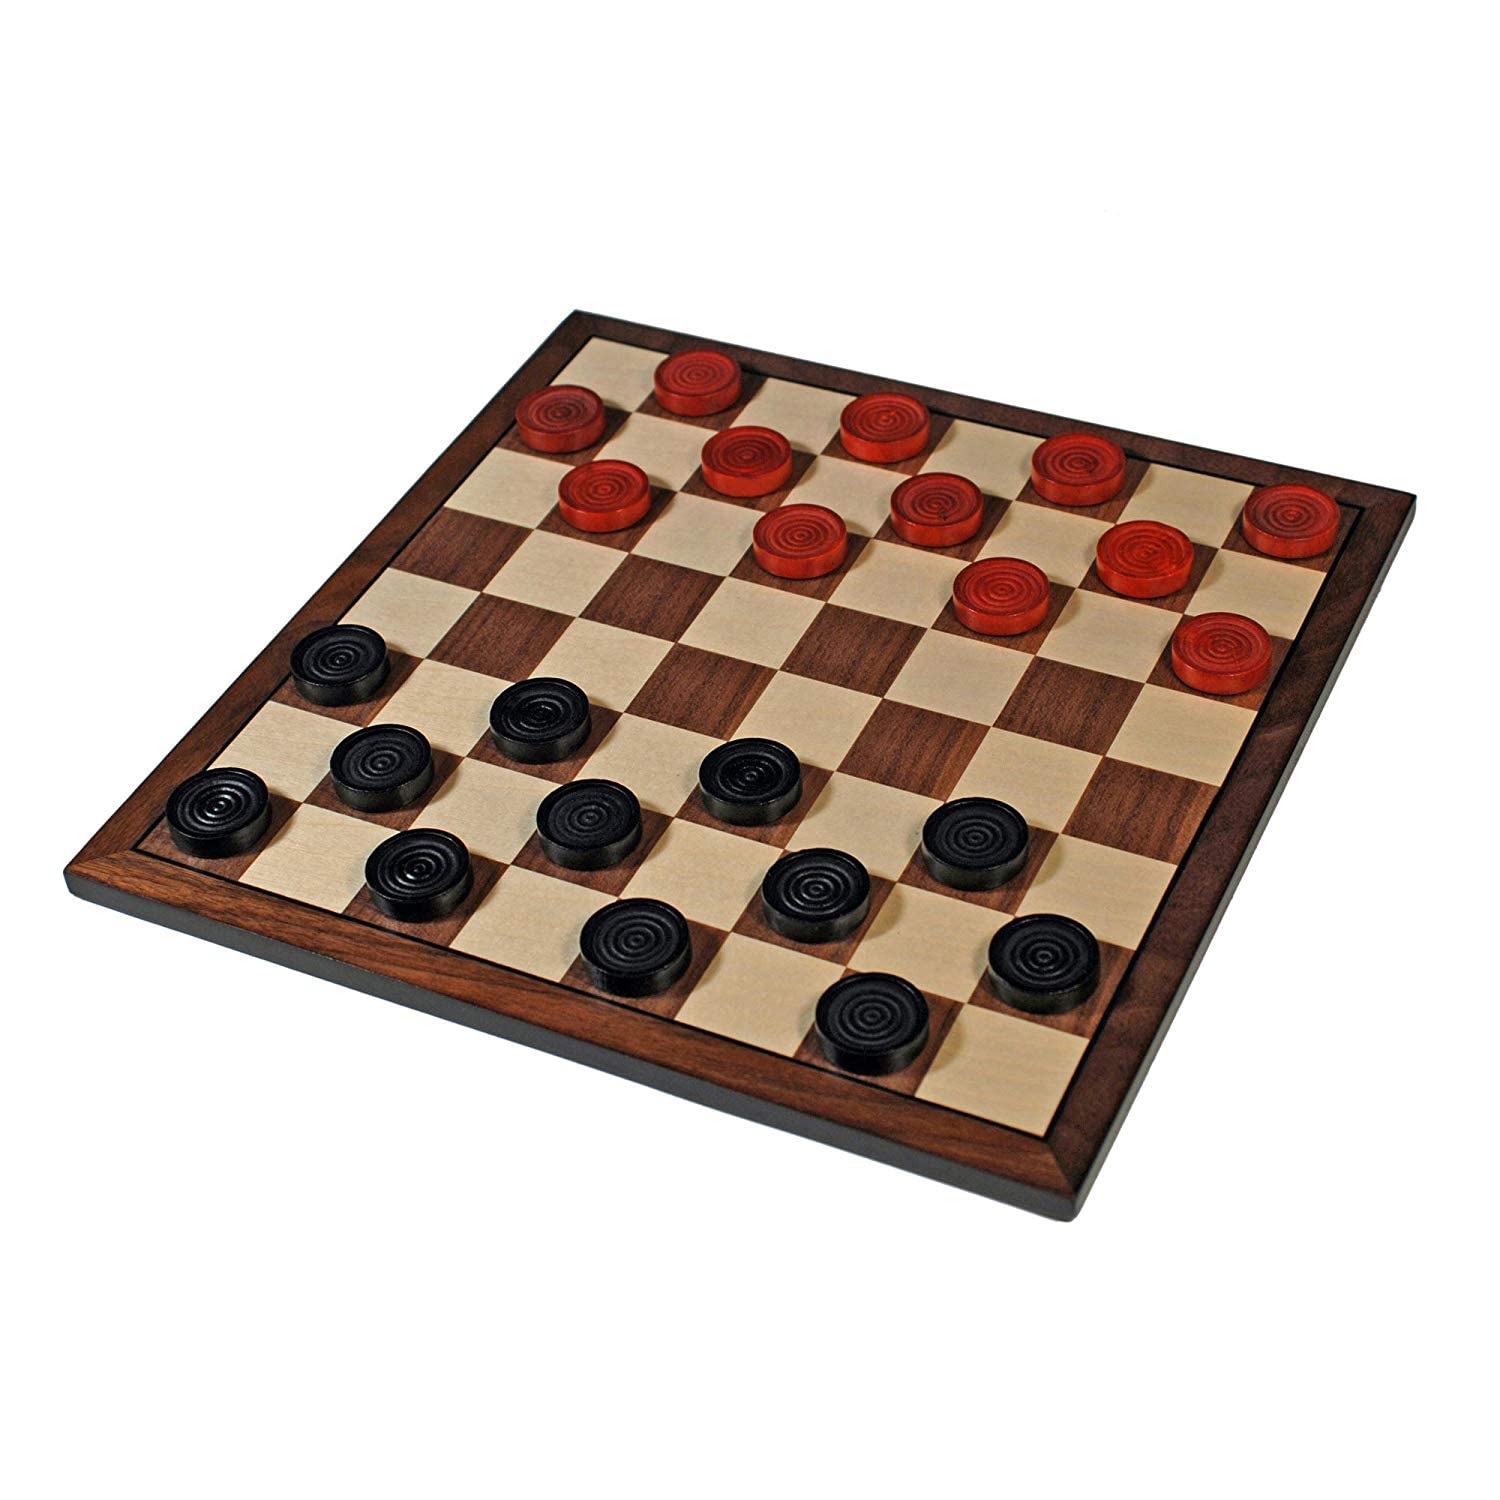 WE Games Old School Red and Black Wooden Checkers Set -12 in.